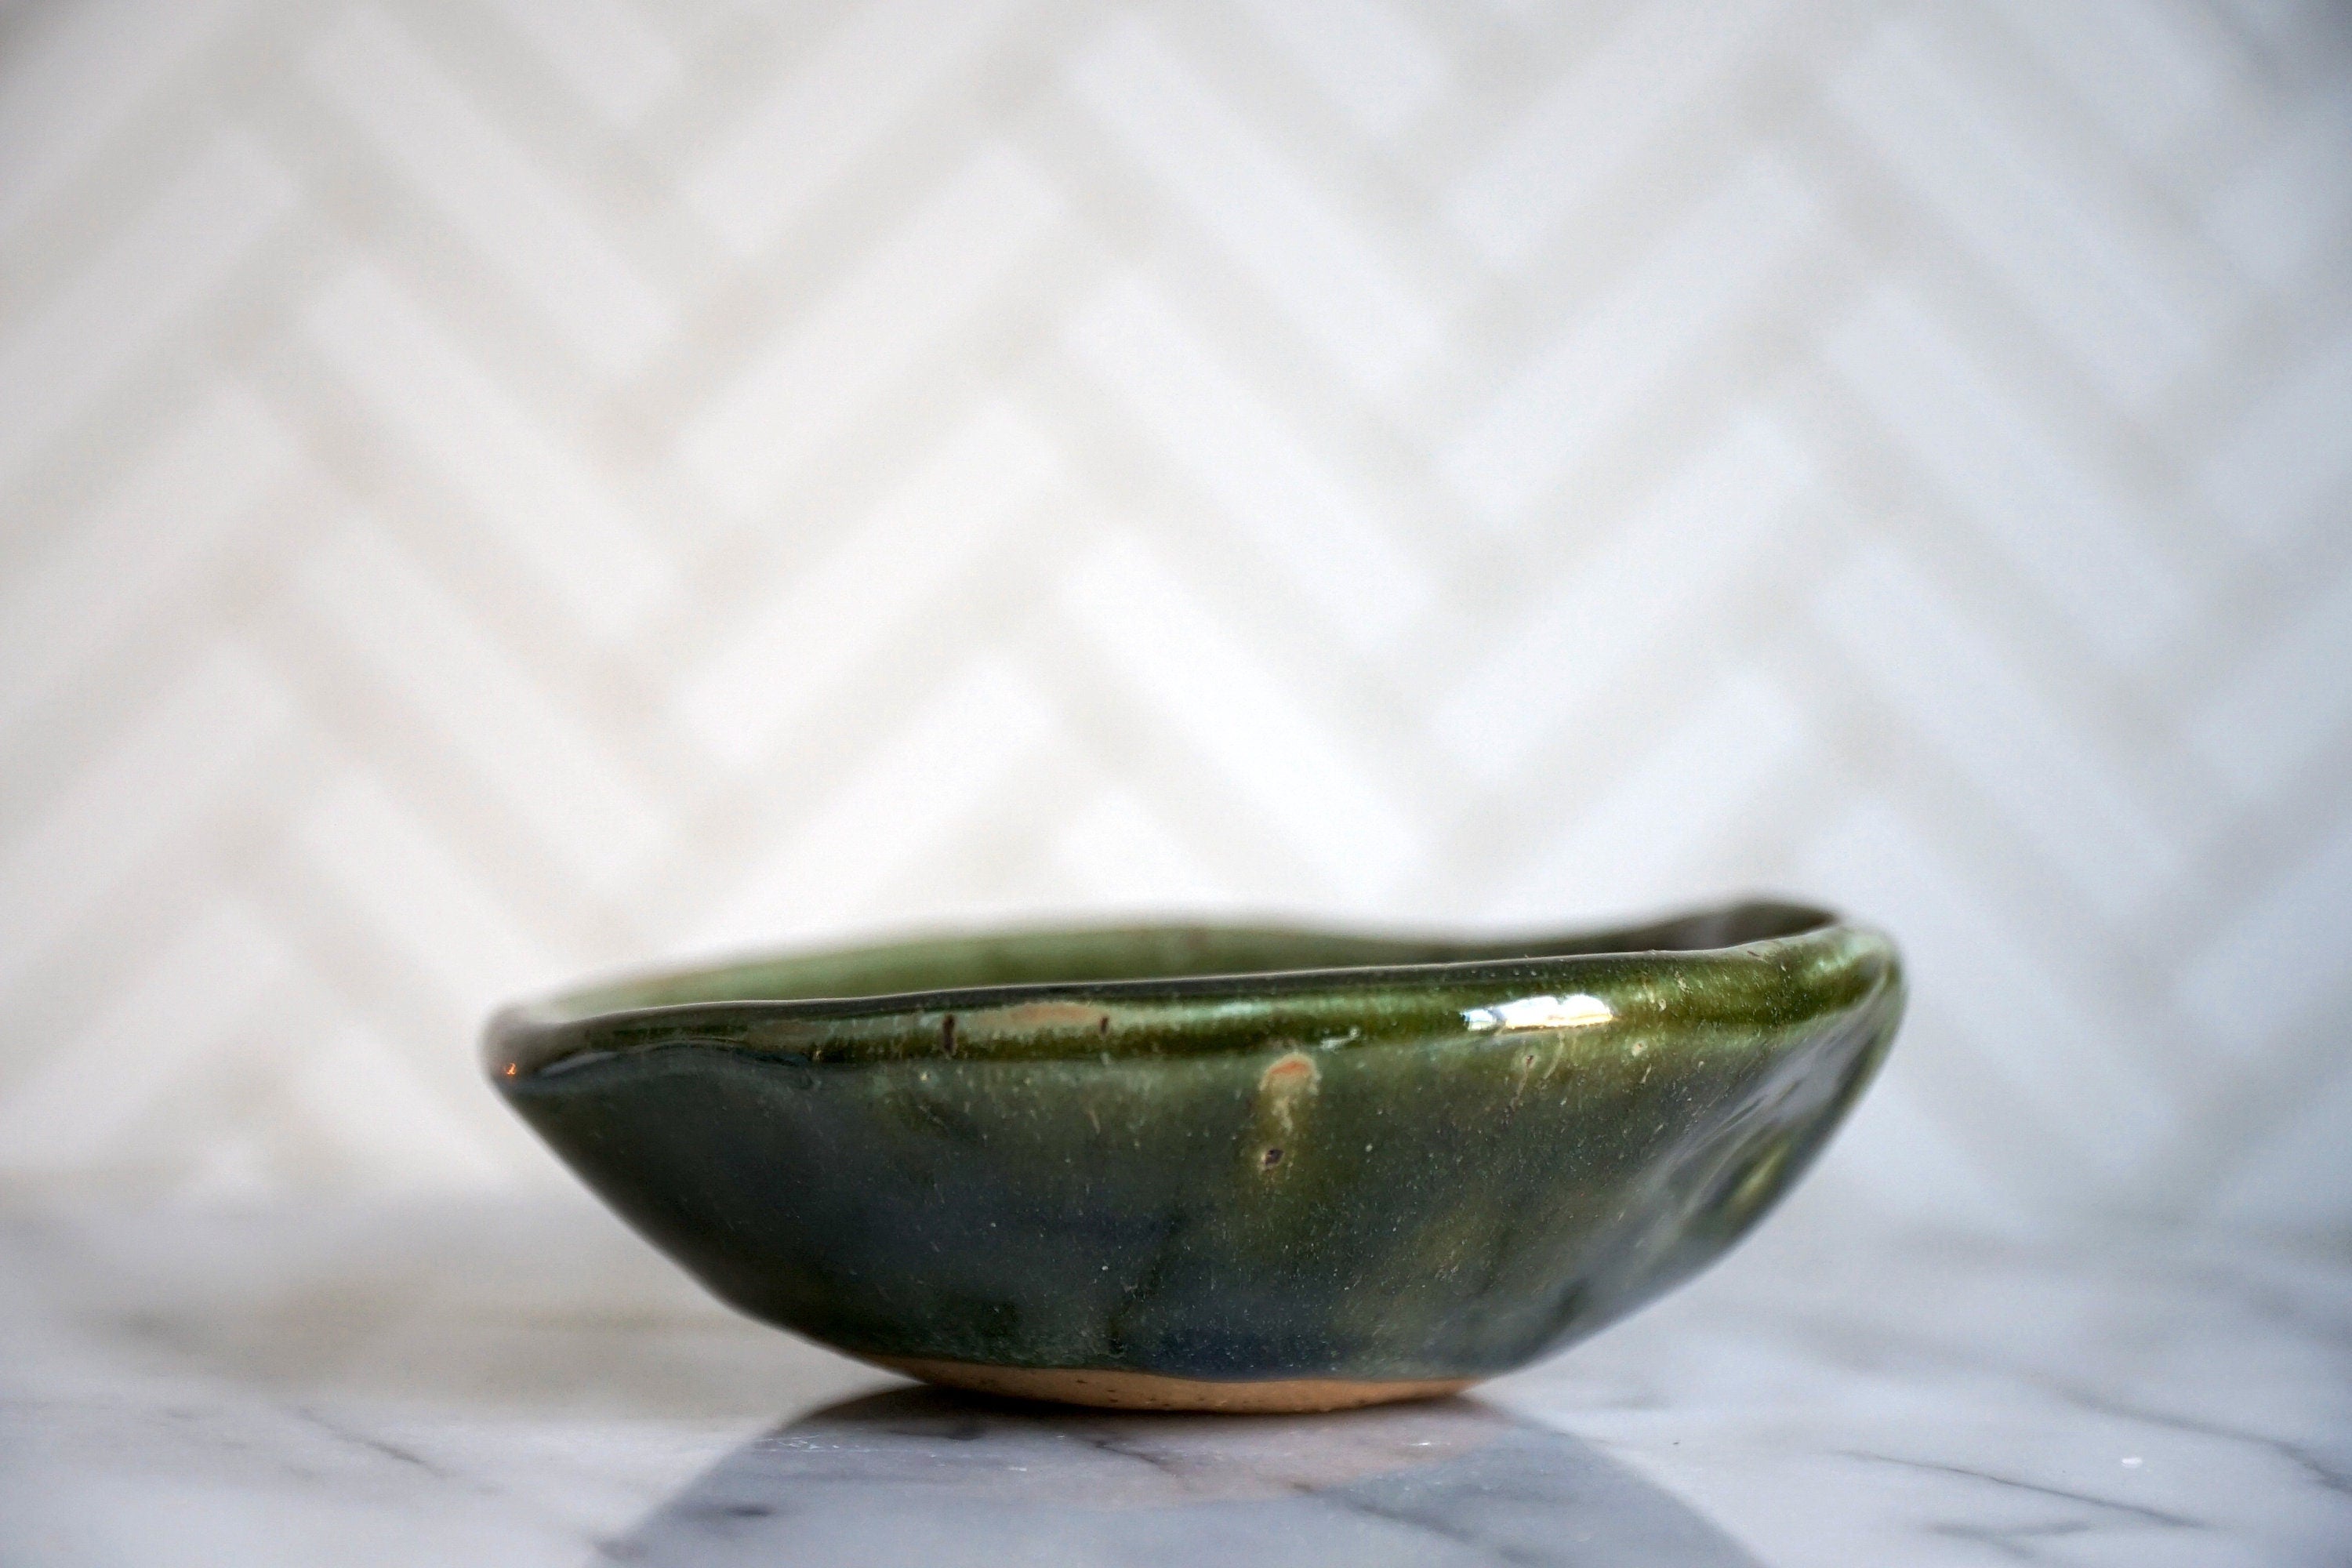 Glimmering Green Stamped Stoneware Bowl - Small Bowl - Stamped Dish - Catch-All - Jewelry Storage - Food Safe - Deco Green Glazed Bowl